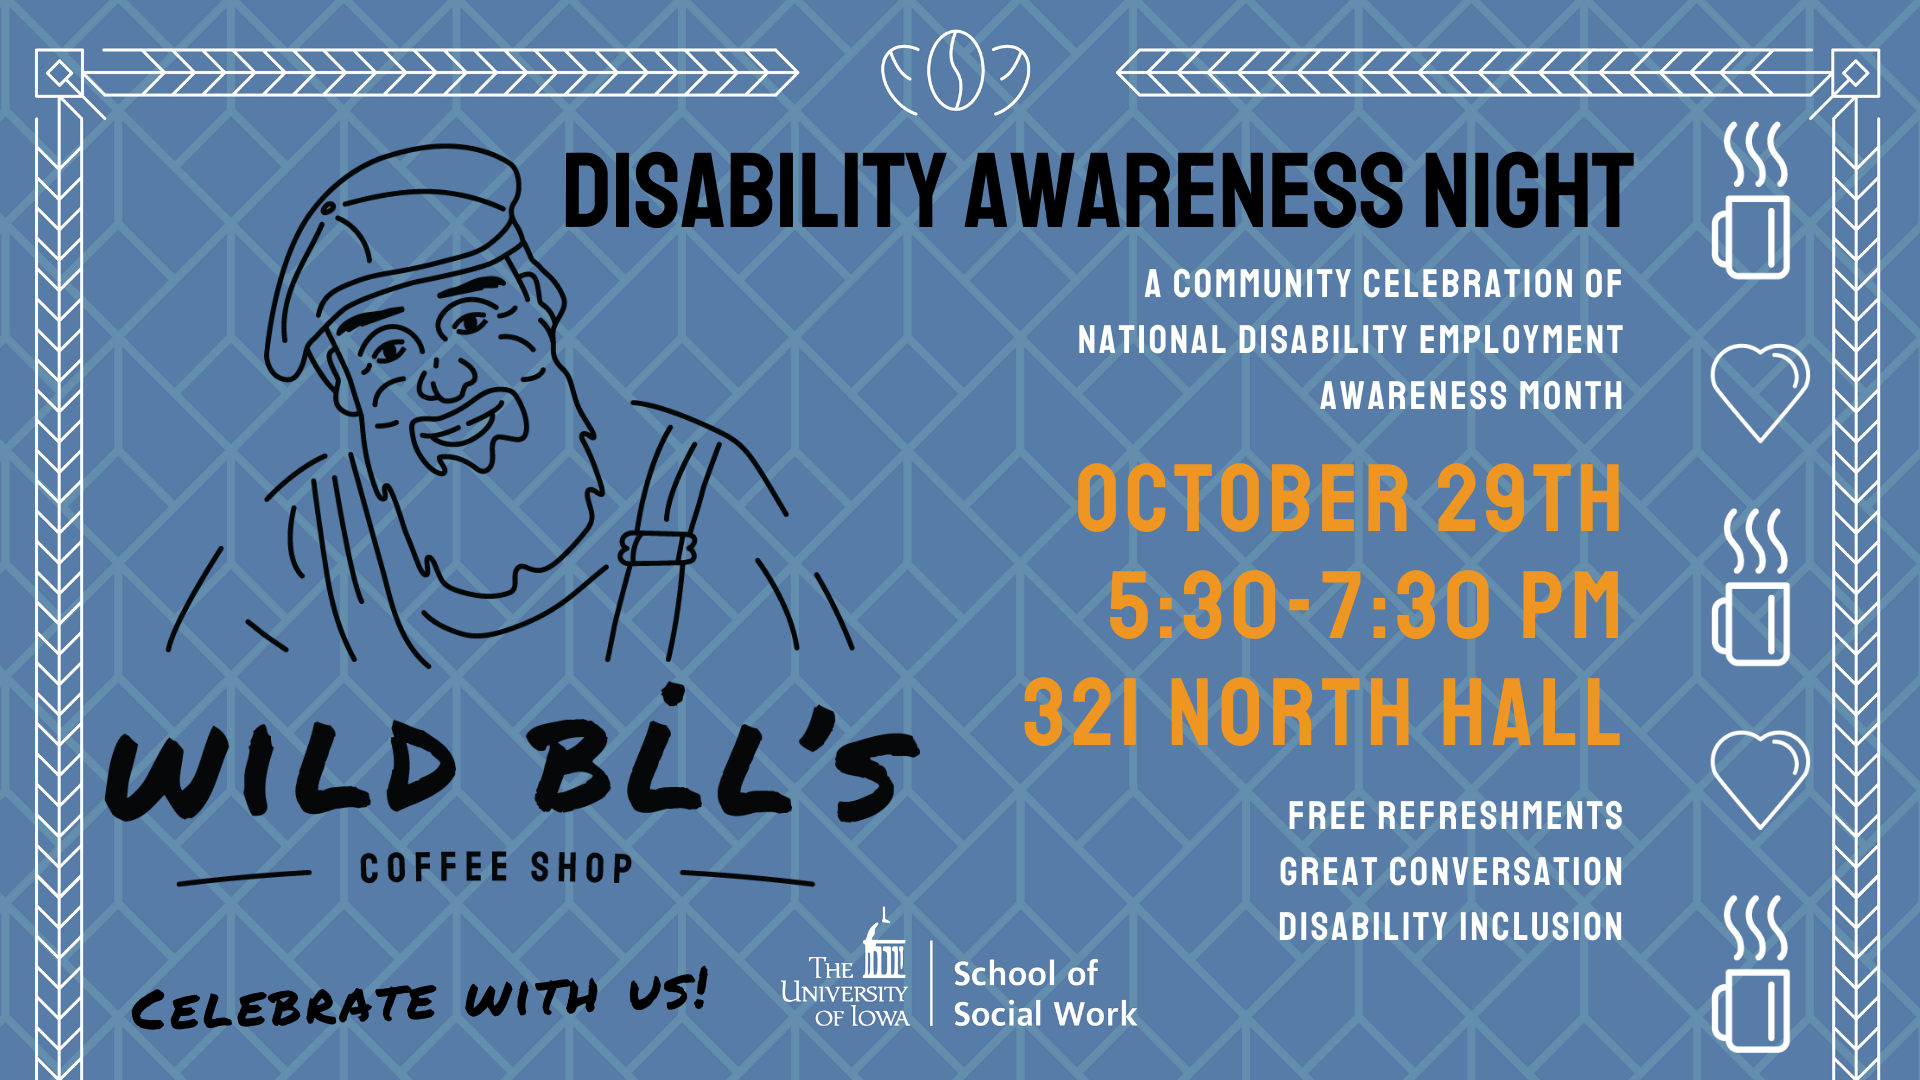 Wild Bill's Coffee Shop Disability Awareness Night October 29 530 to 730 pm